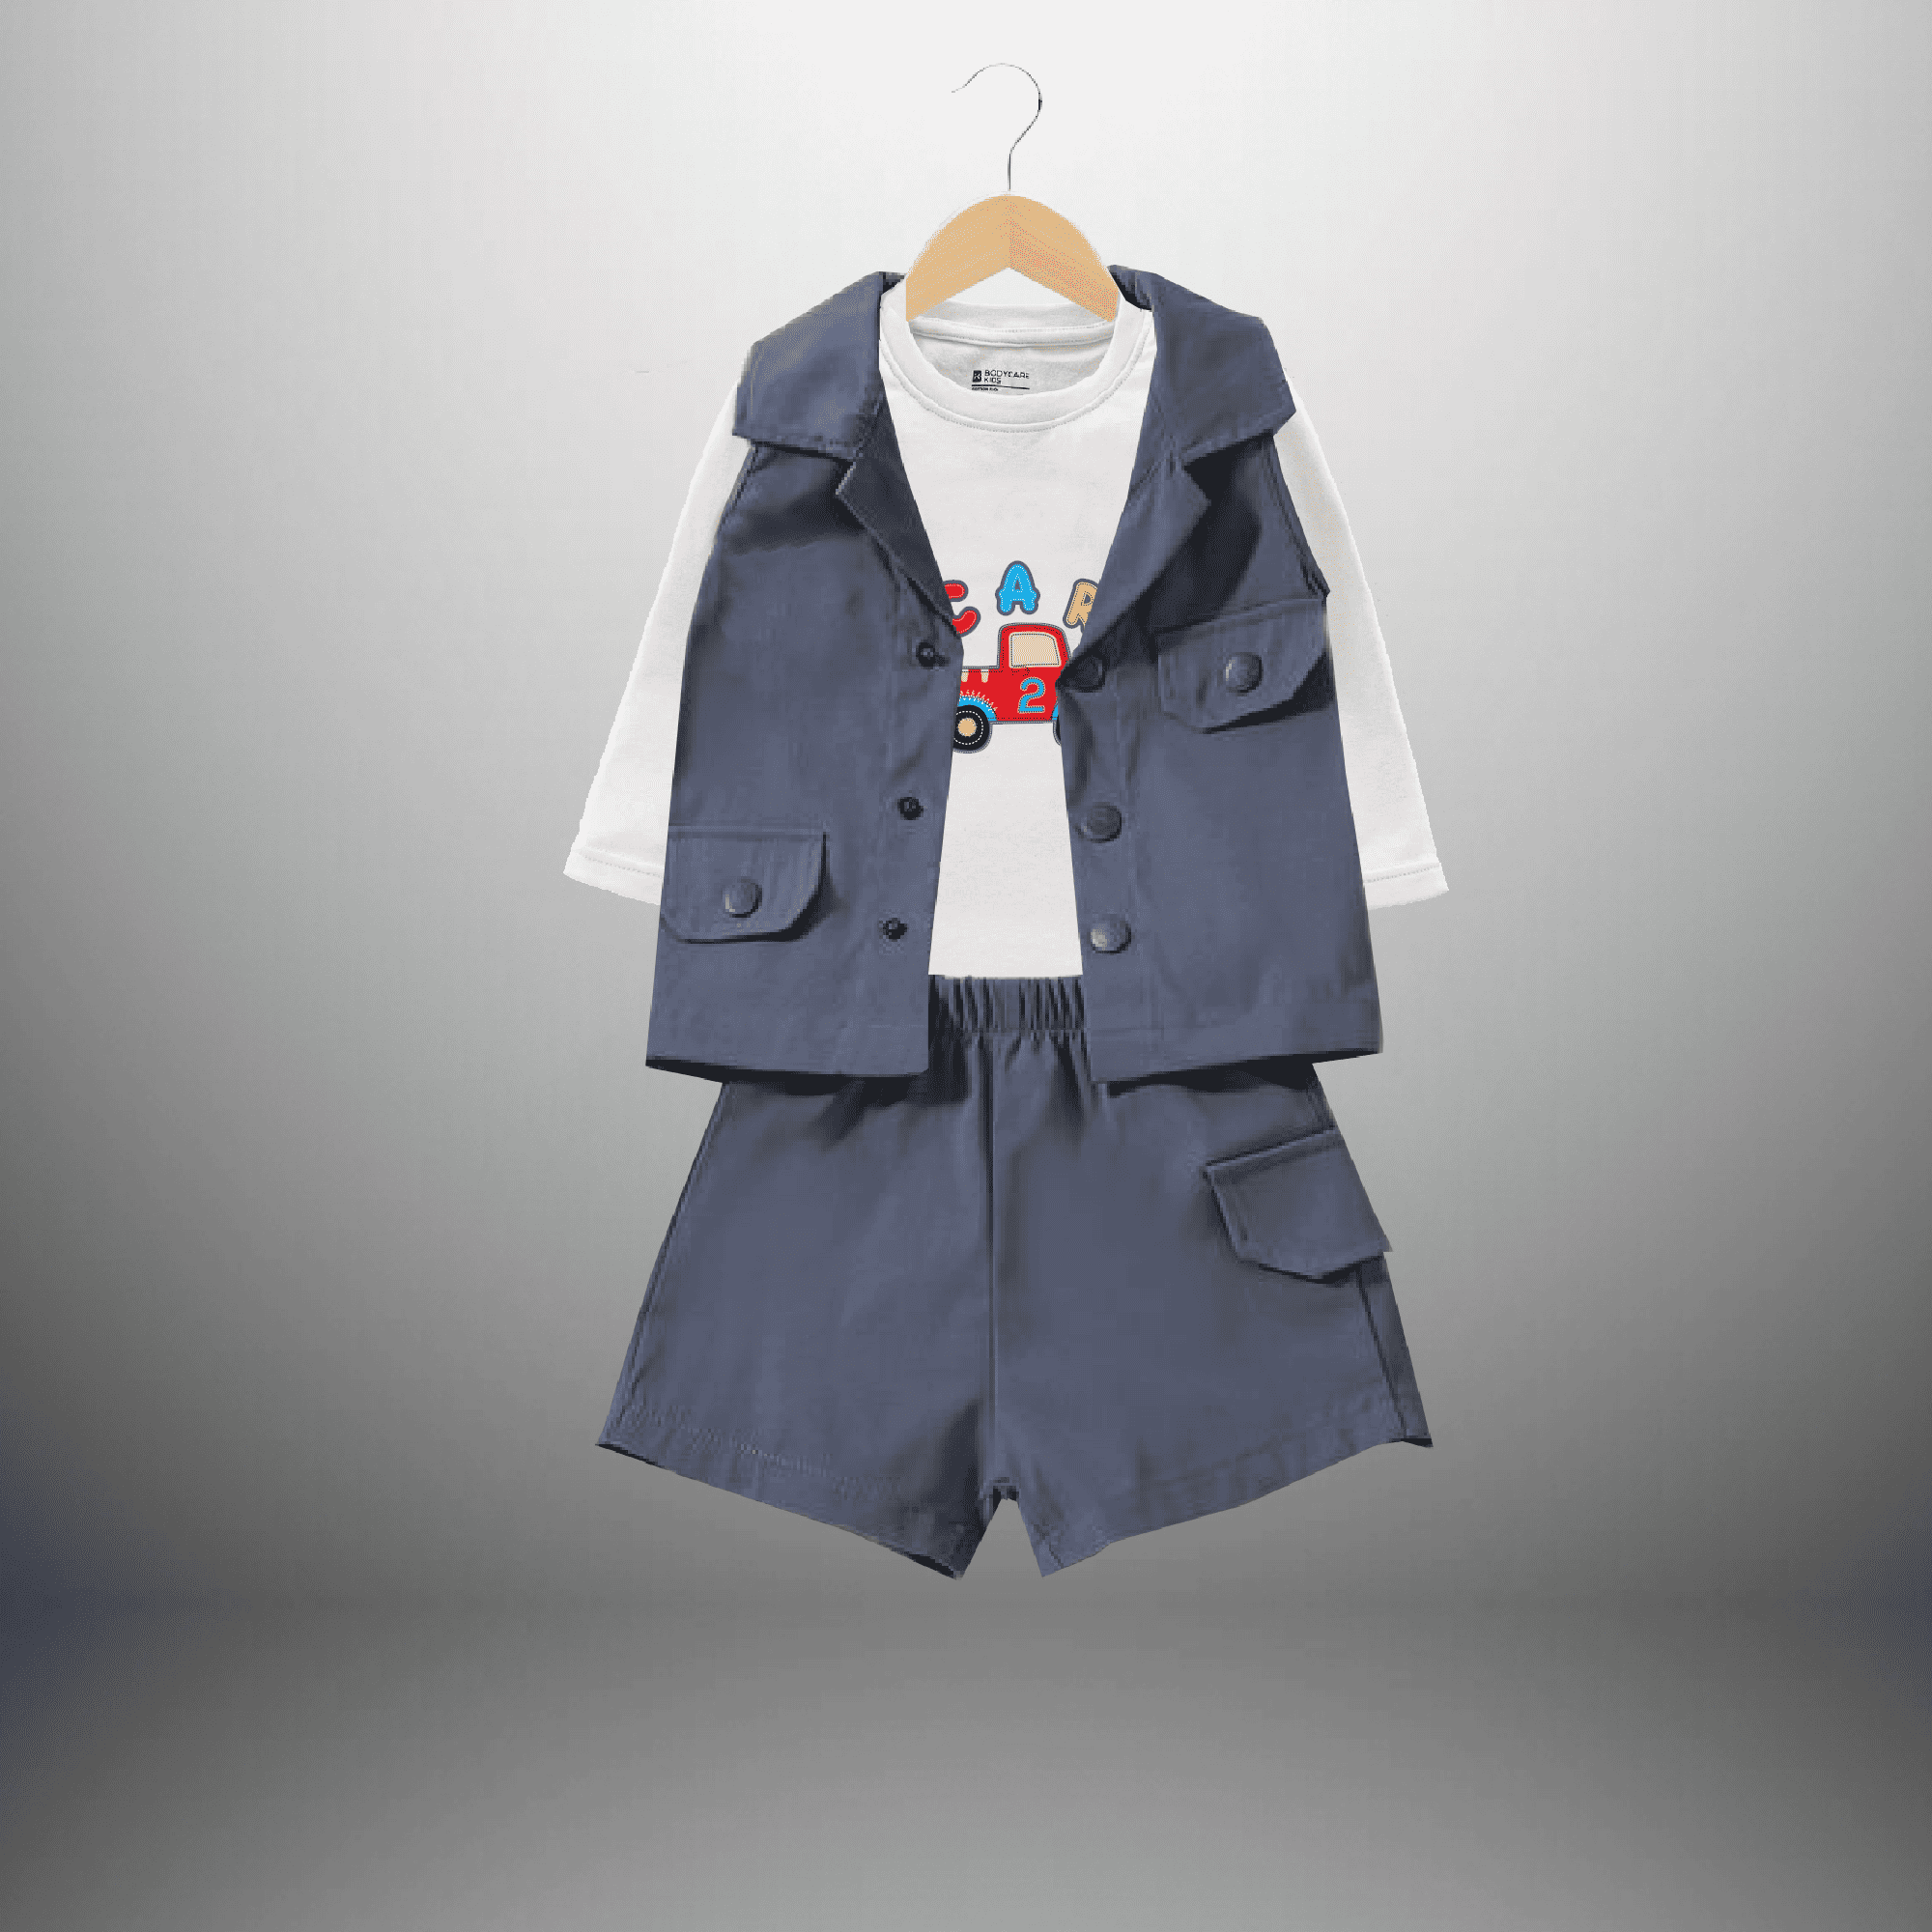 Boy's Blue 3 piece set with white  t-shirt, shorts and a sleeveless jacket-RKFCW488